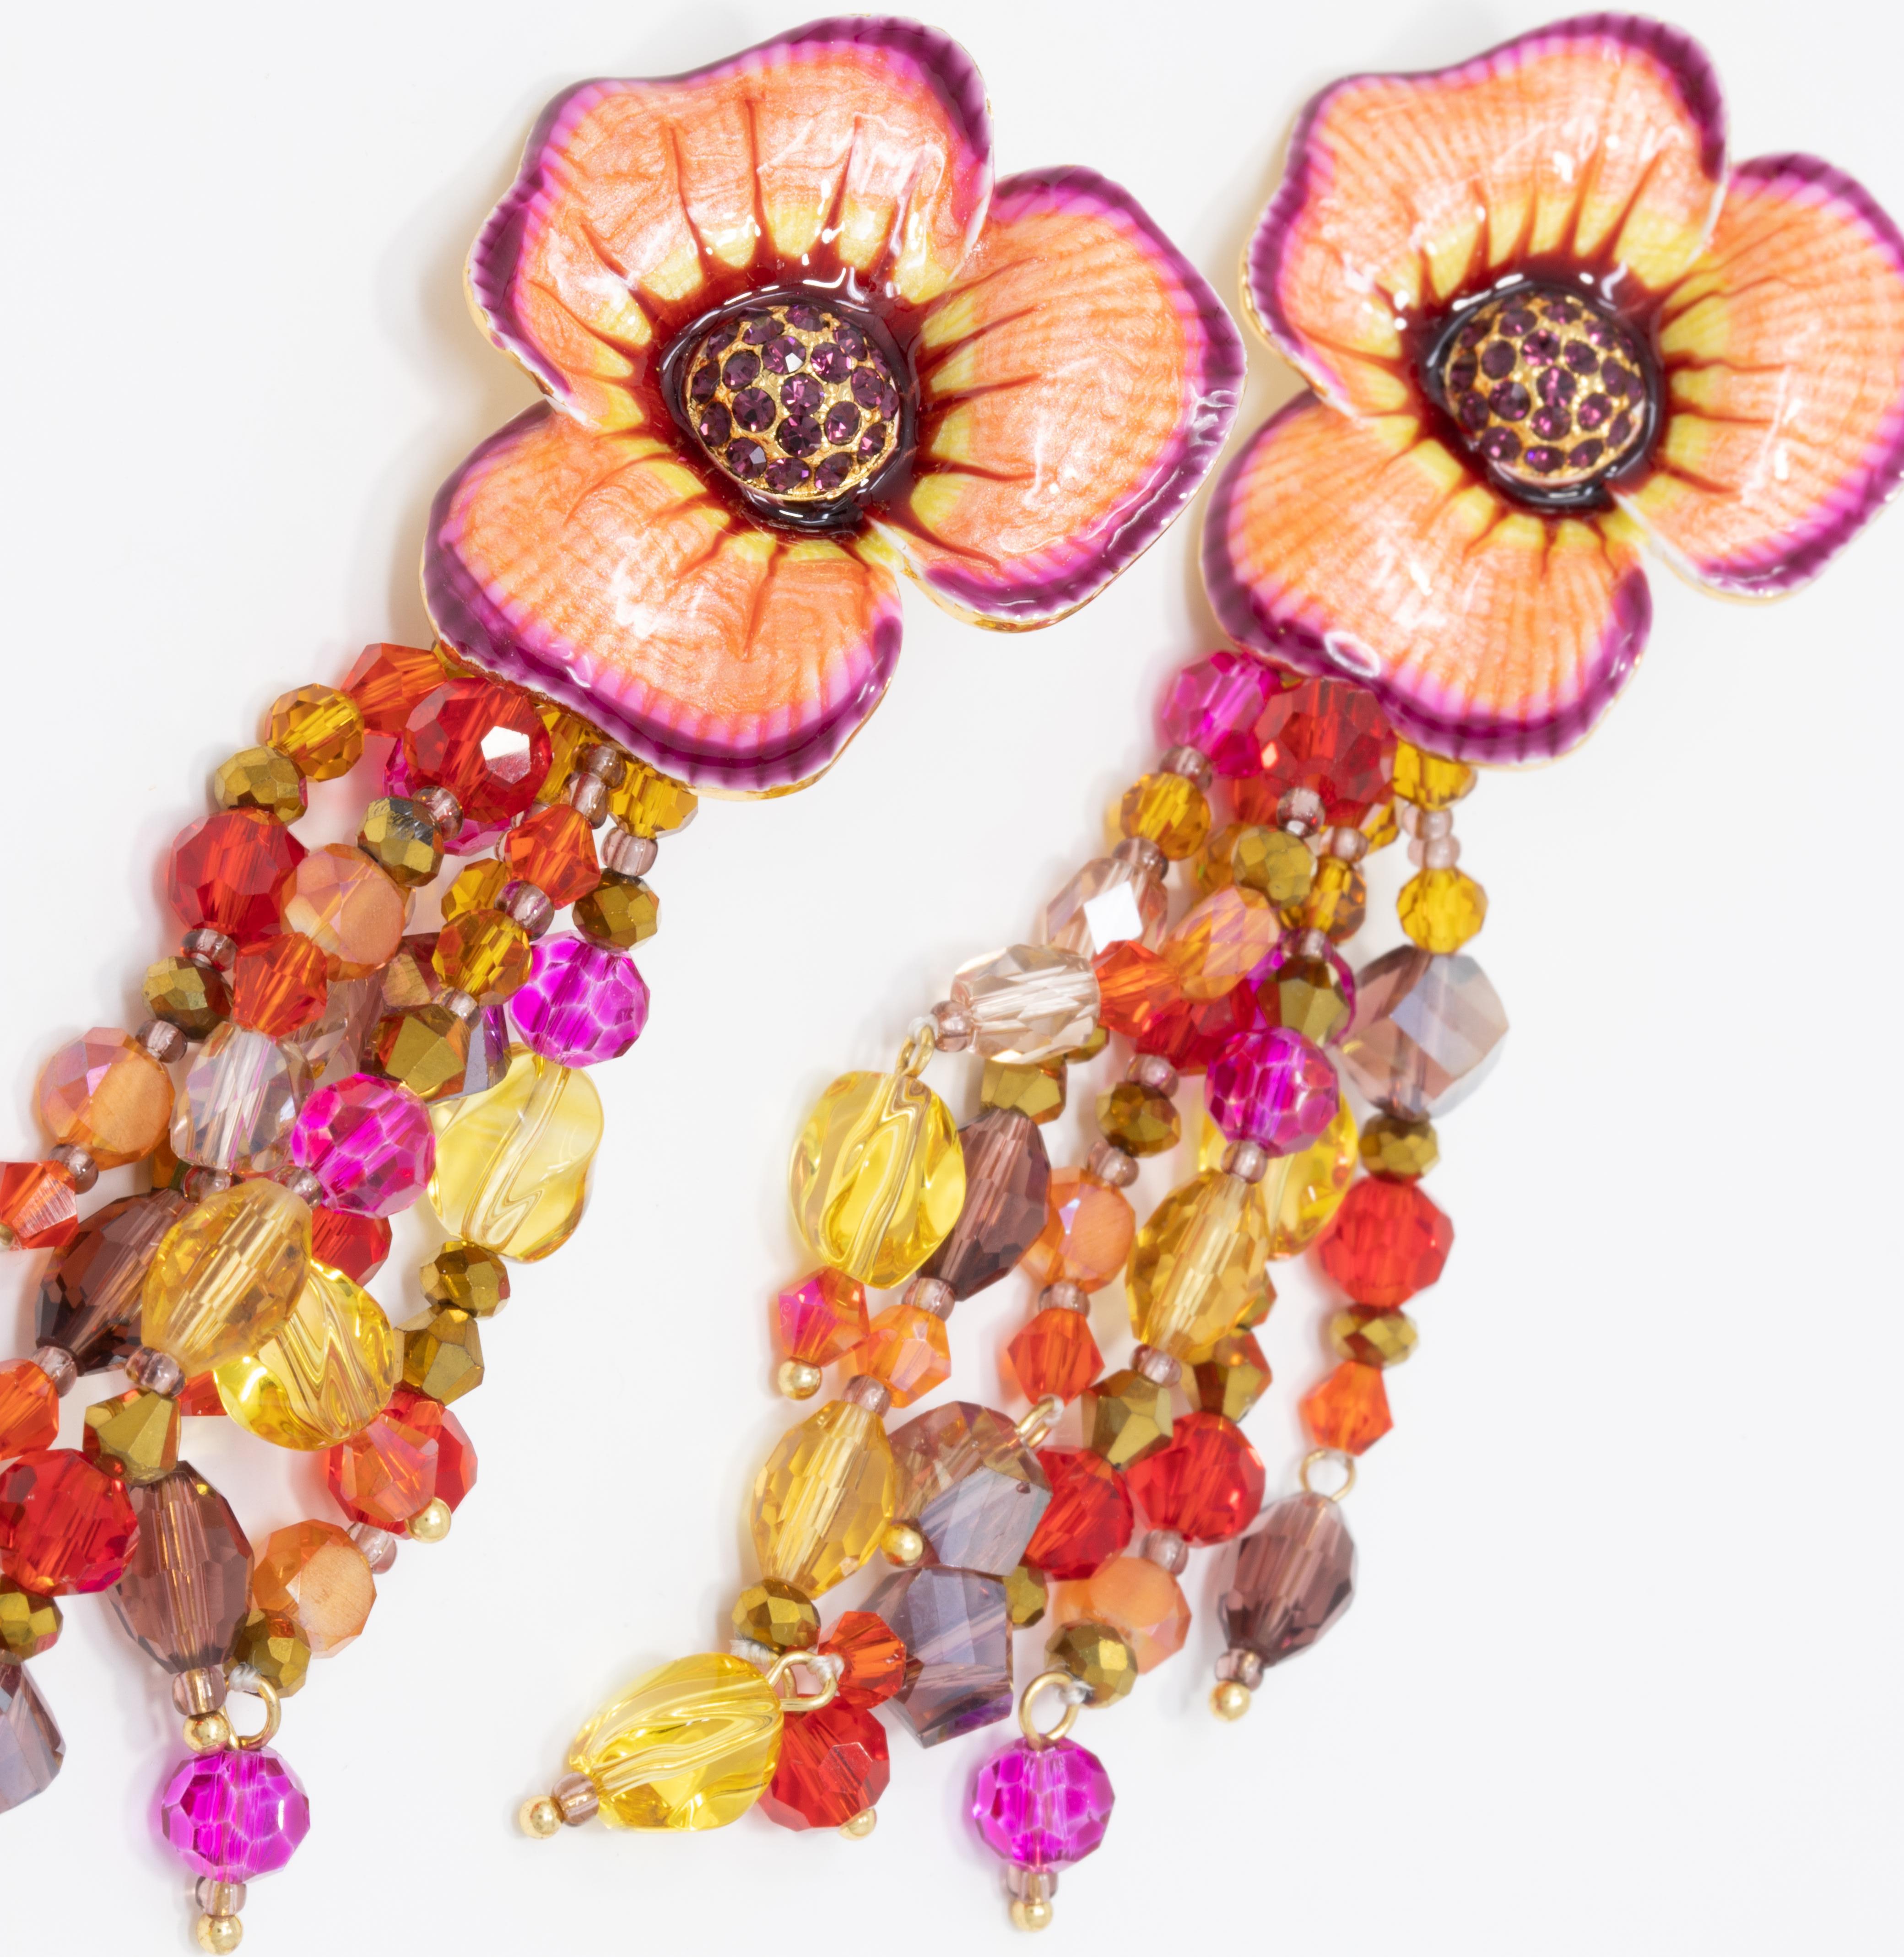 Flower power! A pair of ornate floral clip on earrings featuring dangle ruby, amethyst, and amber crystal strands. Painted peach and purple. Set on gold plated metal.

Hallmarks: Jay, Jay Strongwater, CN

By Jay Strongwater, originally for HSN.